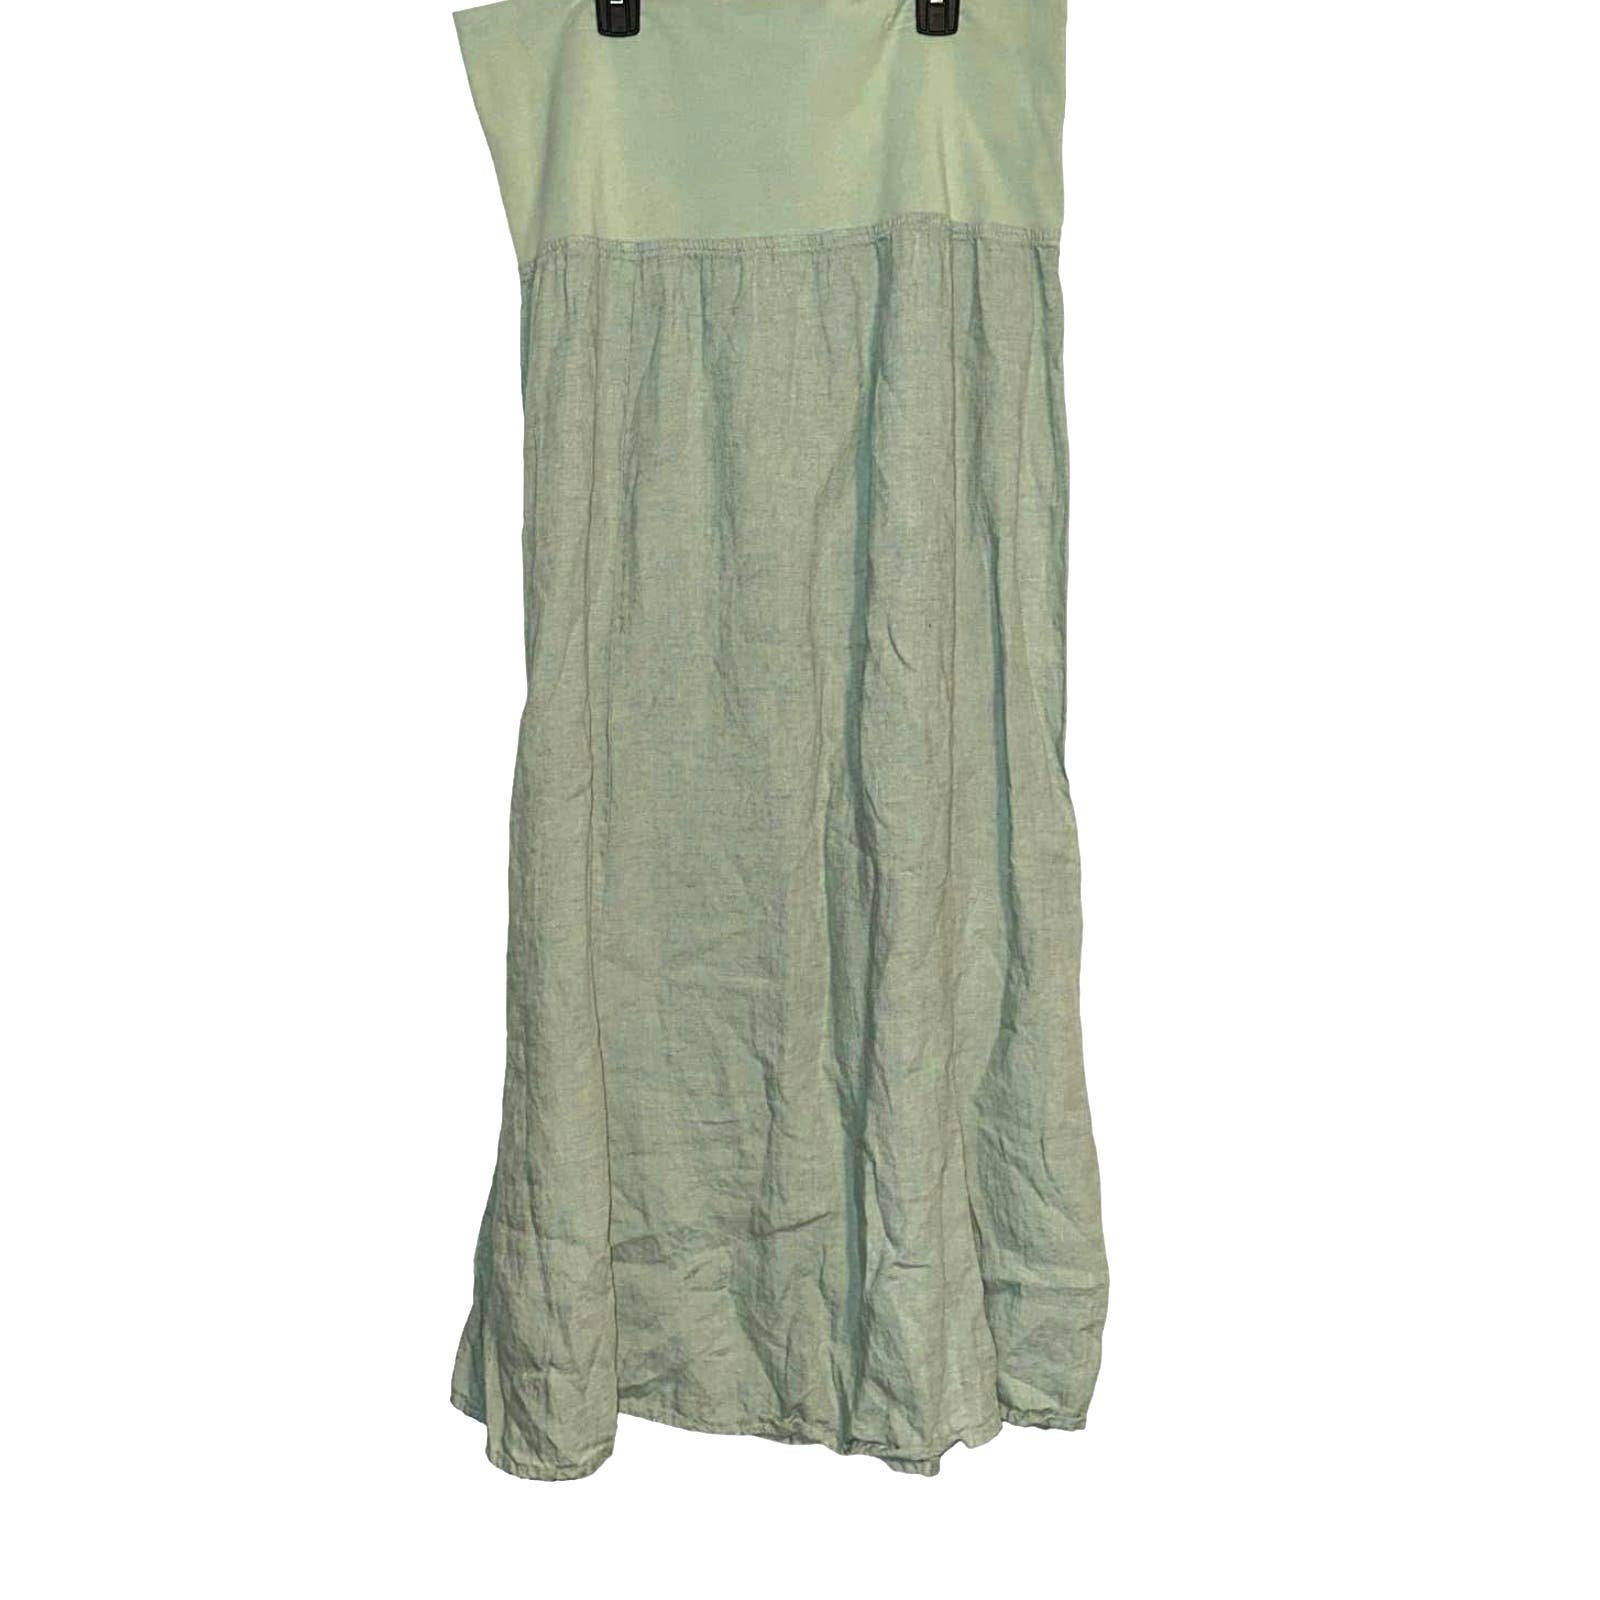 Nice Flax Linen Maxi Skirt Light Green Size Large PUll On GnFmiZf08 Store Online